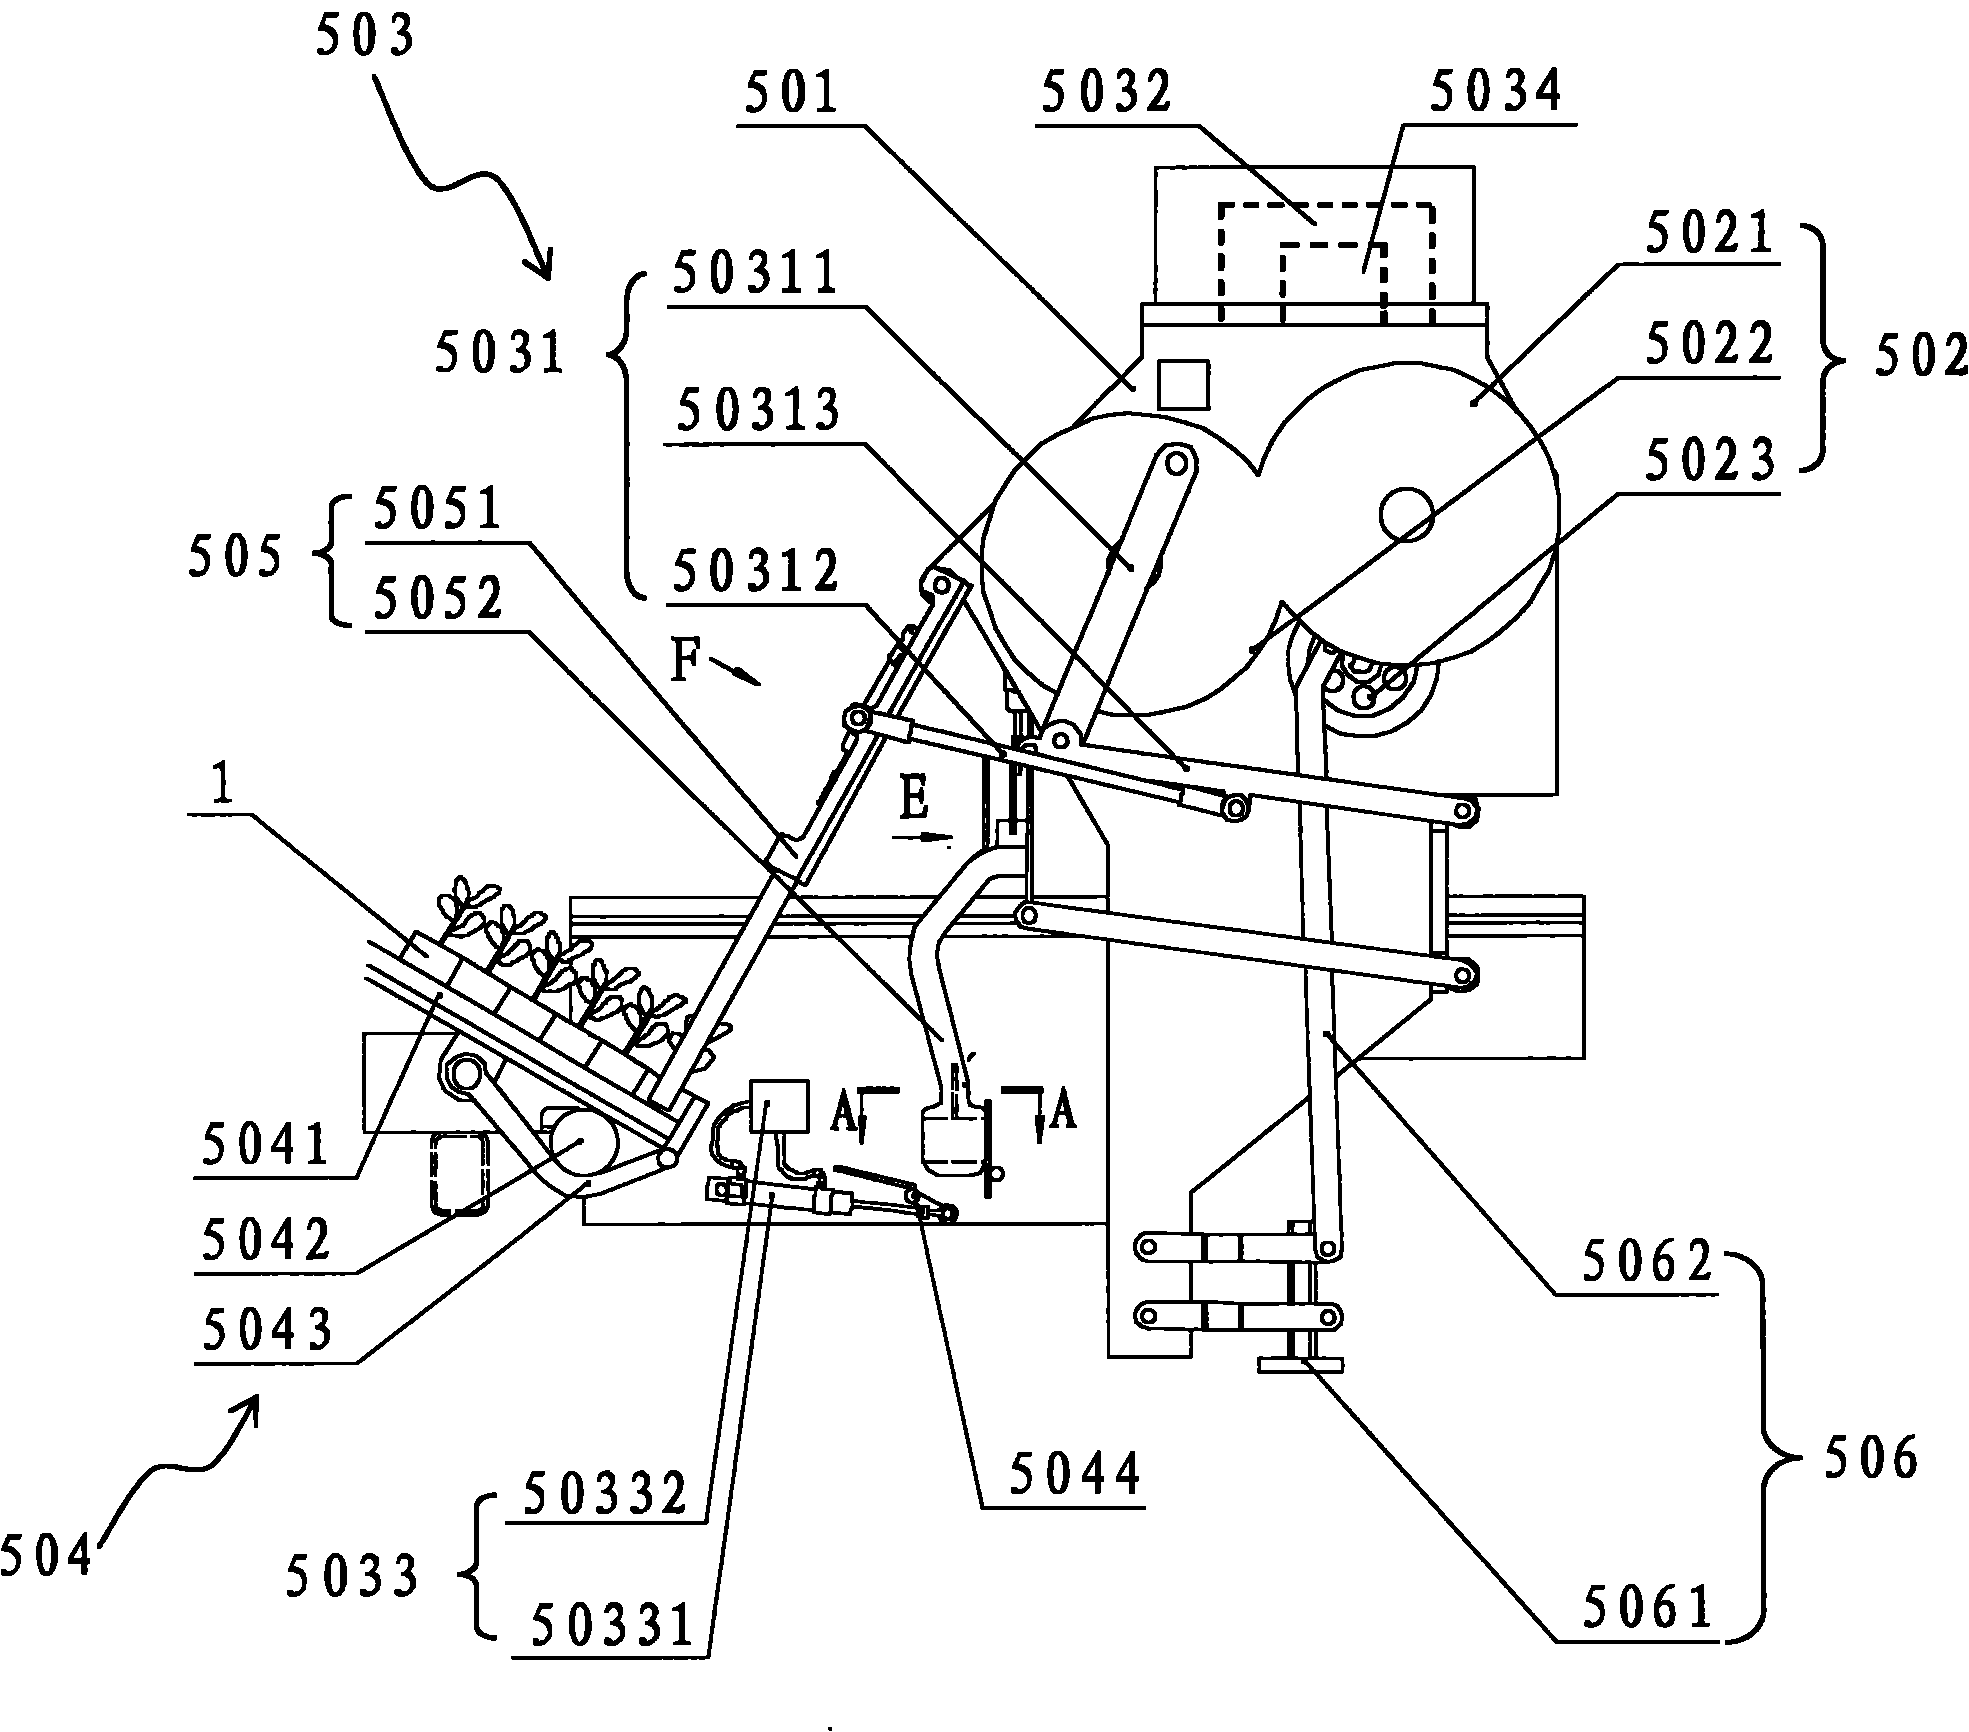 Pot seedling planting device and pot seedling transplanting machine with the same